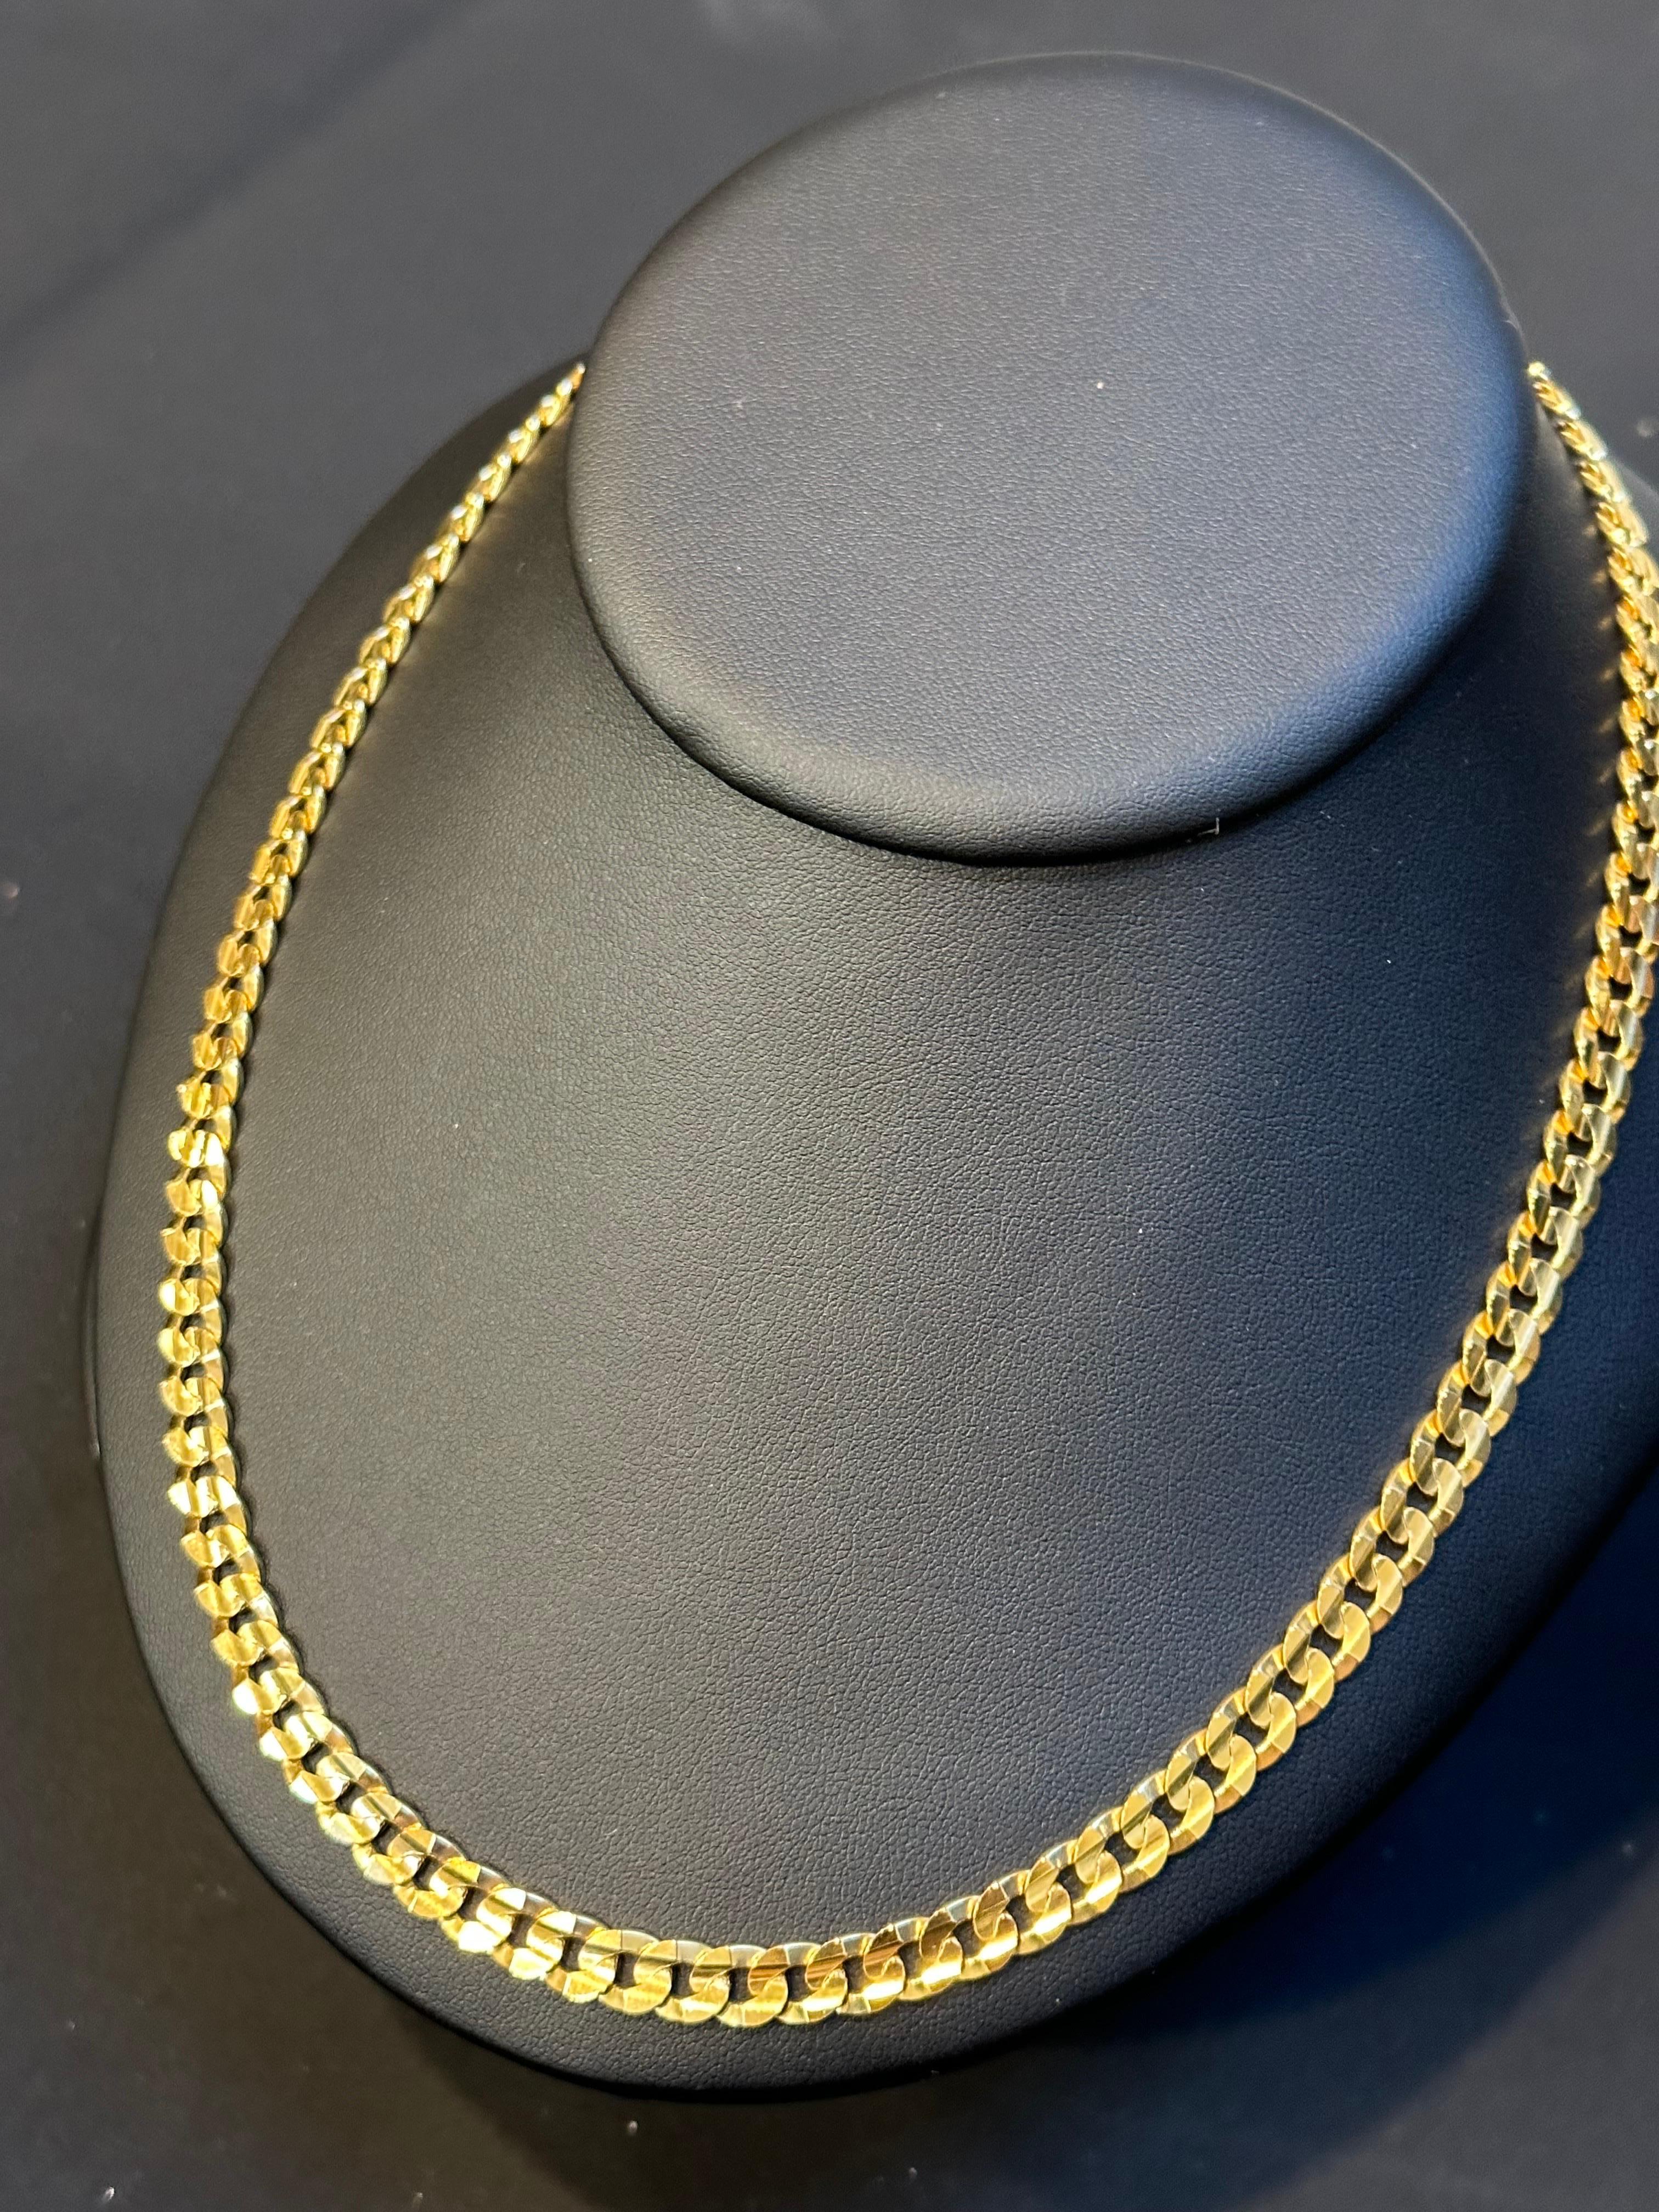 For those in search of high-quality, authentic gold jewelry, this Vintage 14 Kt Yellow Gold Cuban link chain is a must-see. Made from solid 14K gold, this chain is both durable and luxurious, with a weight of 39.3 grams.

Crafted in Italy, this